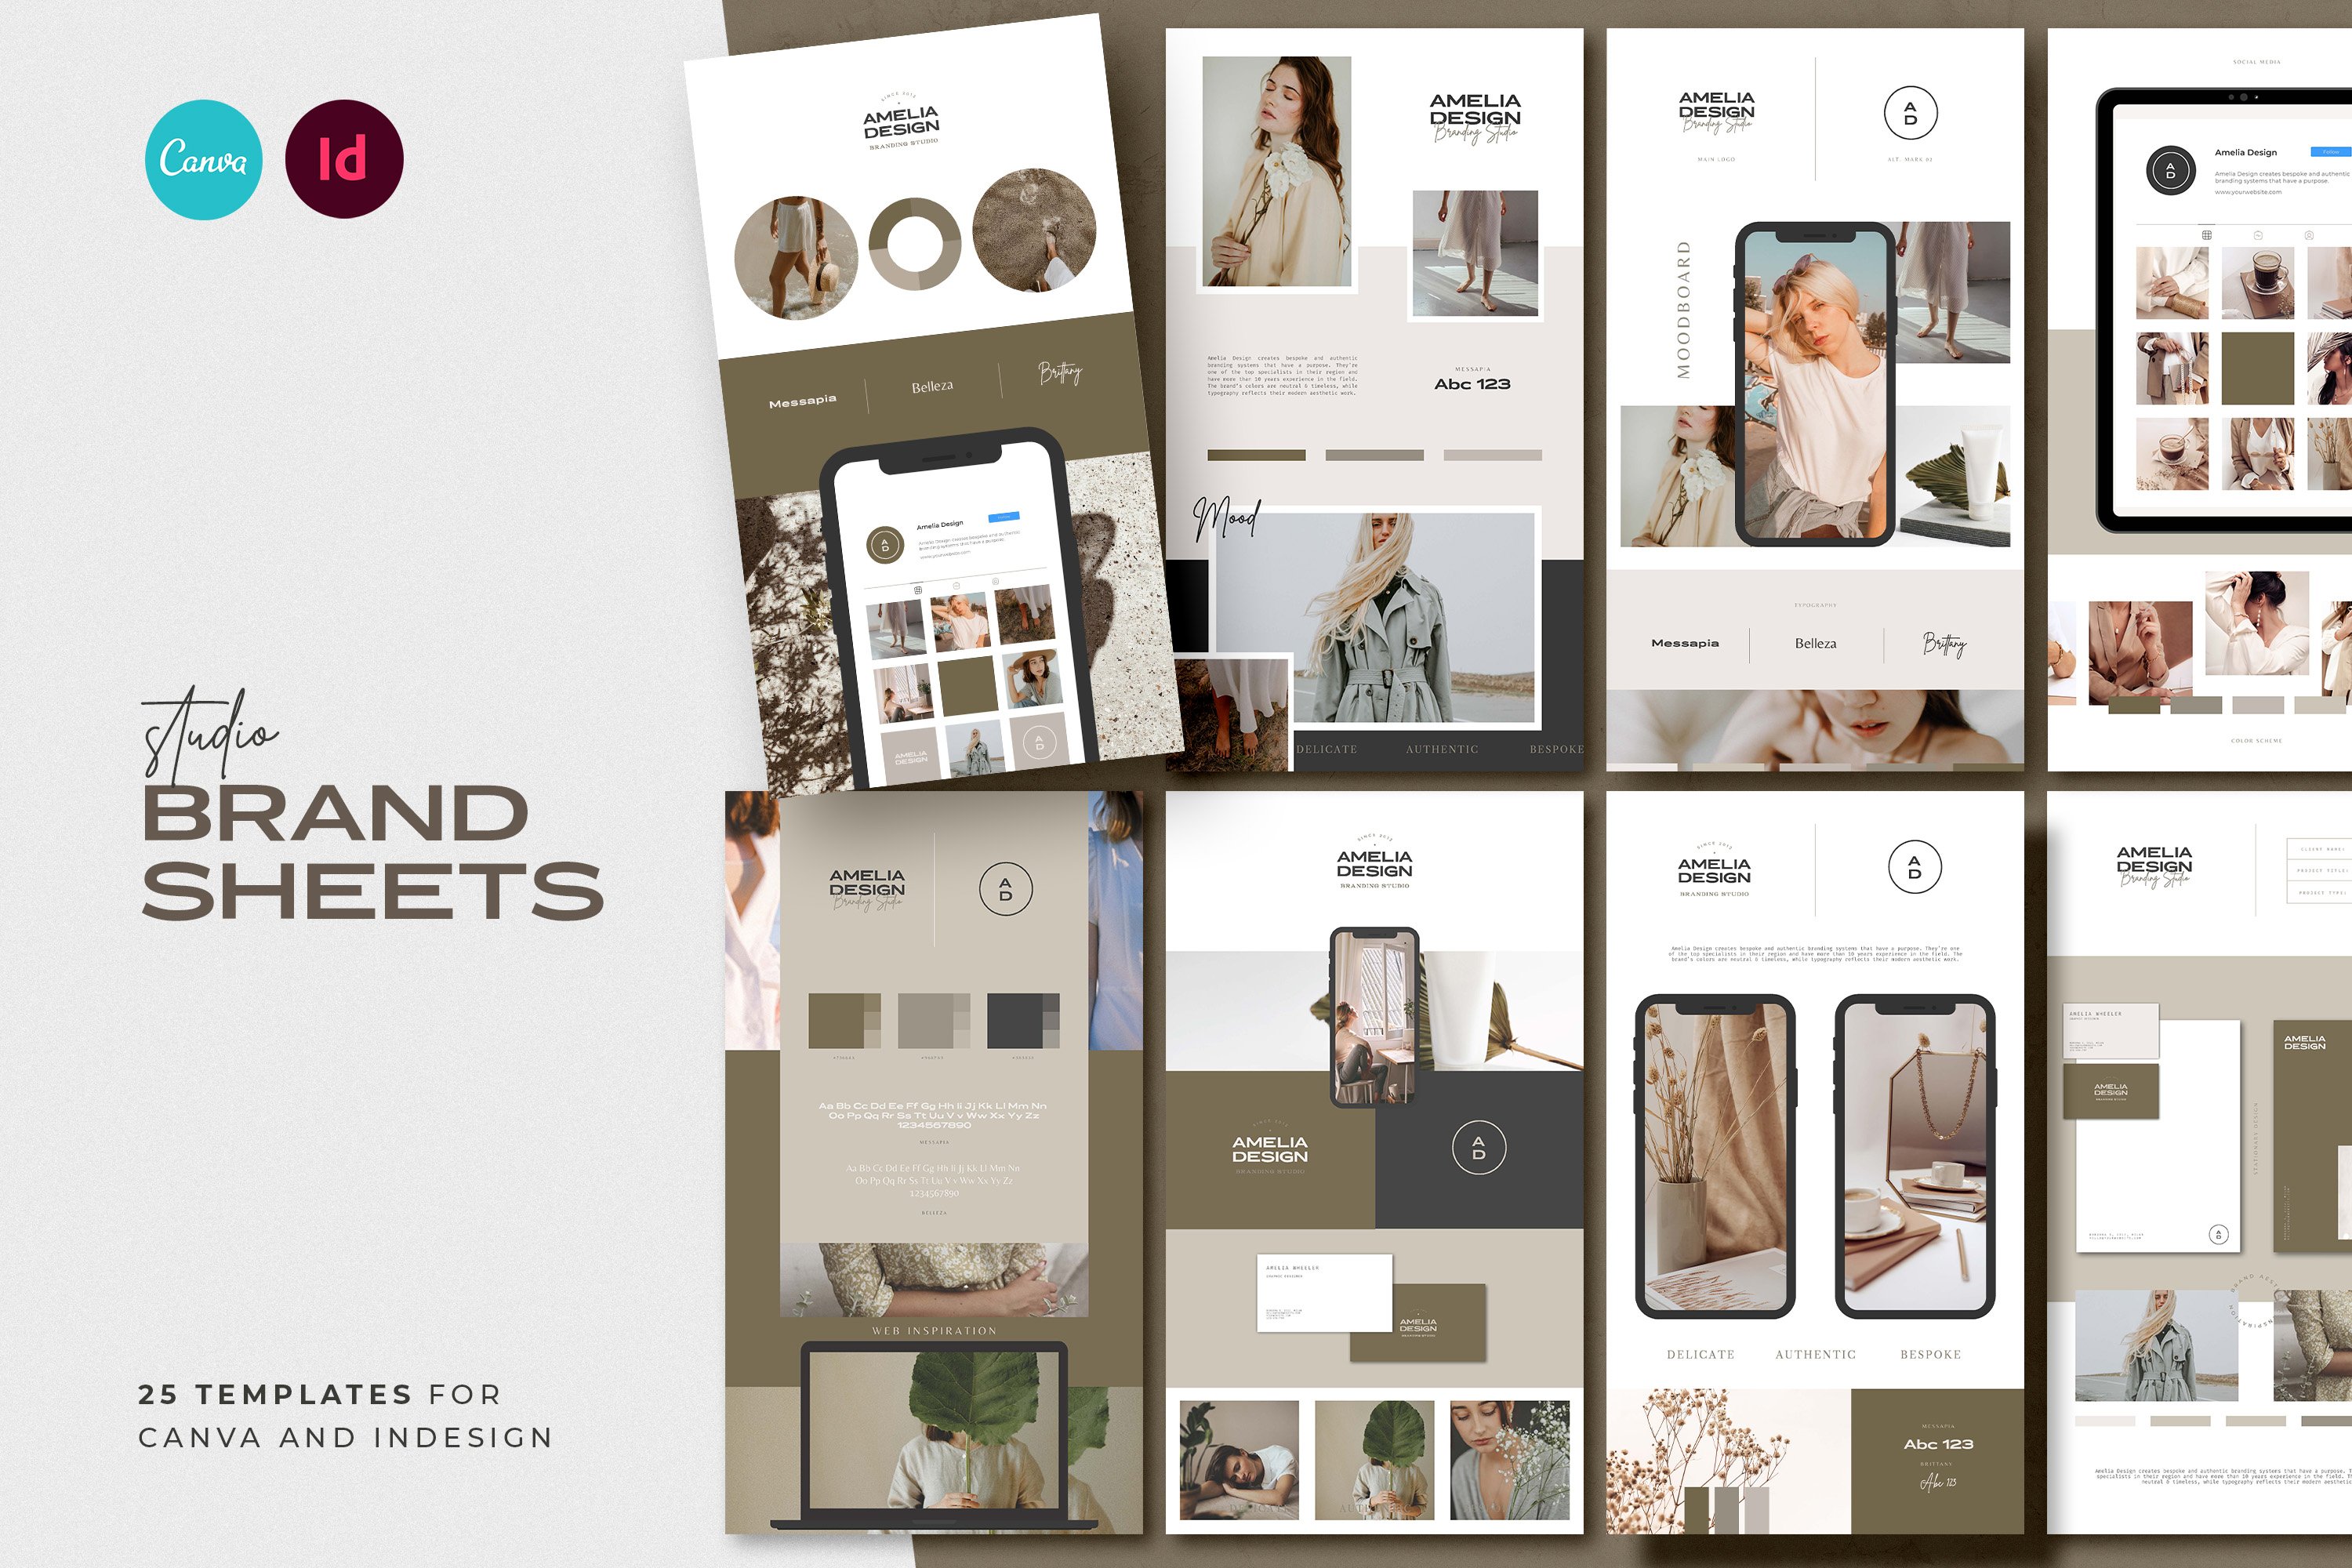 Studio Brand Sheets for CANVA cover image.